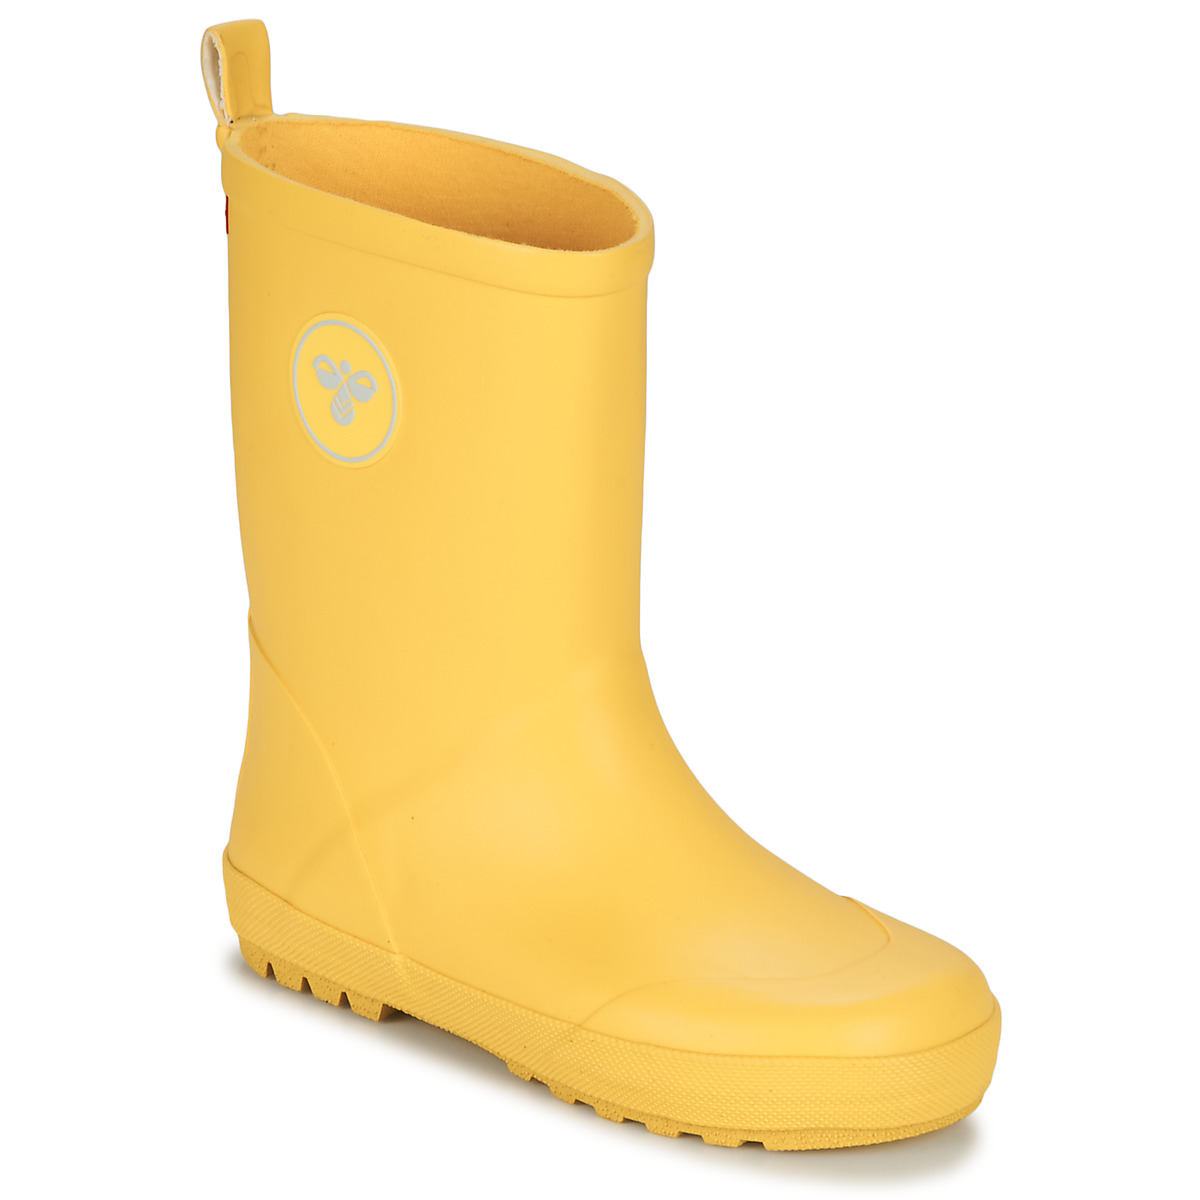 JR. Spartoo - Free ! NET hummel BOOT Wellington Child - Shoes boots | delivery RUBBER Yellow